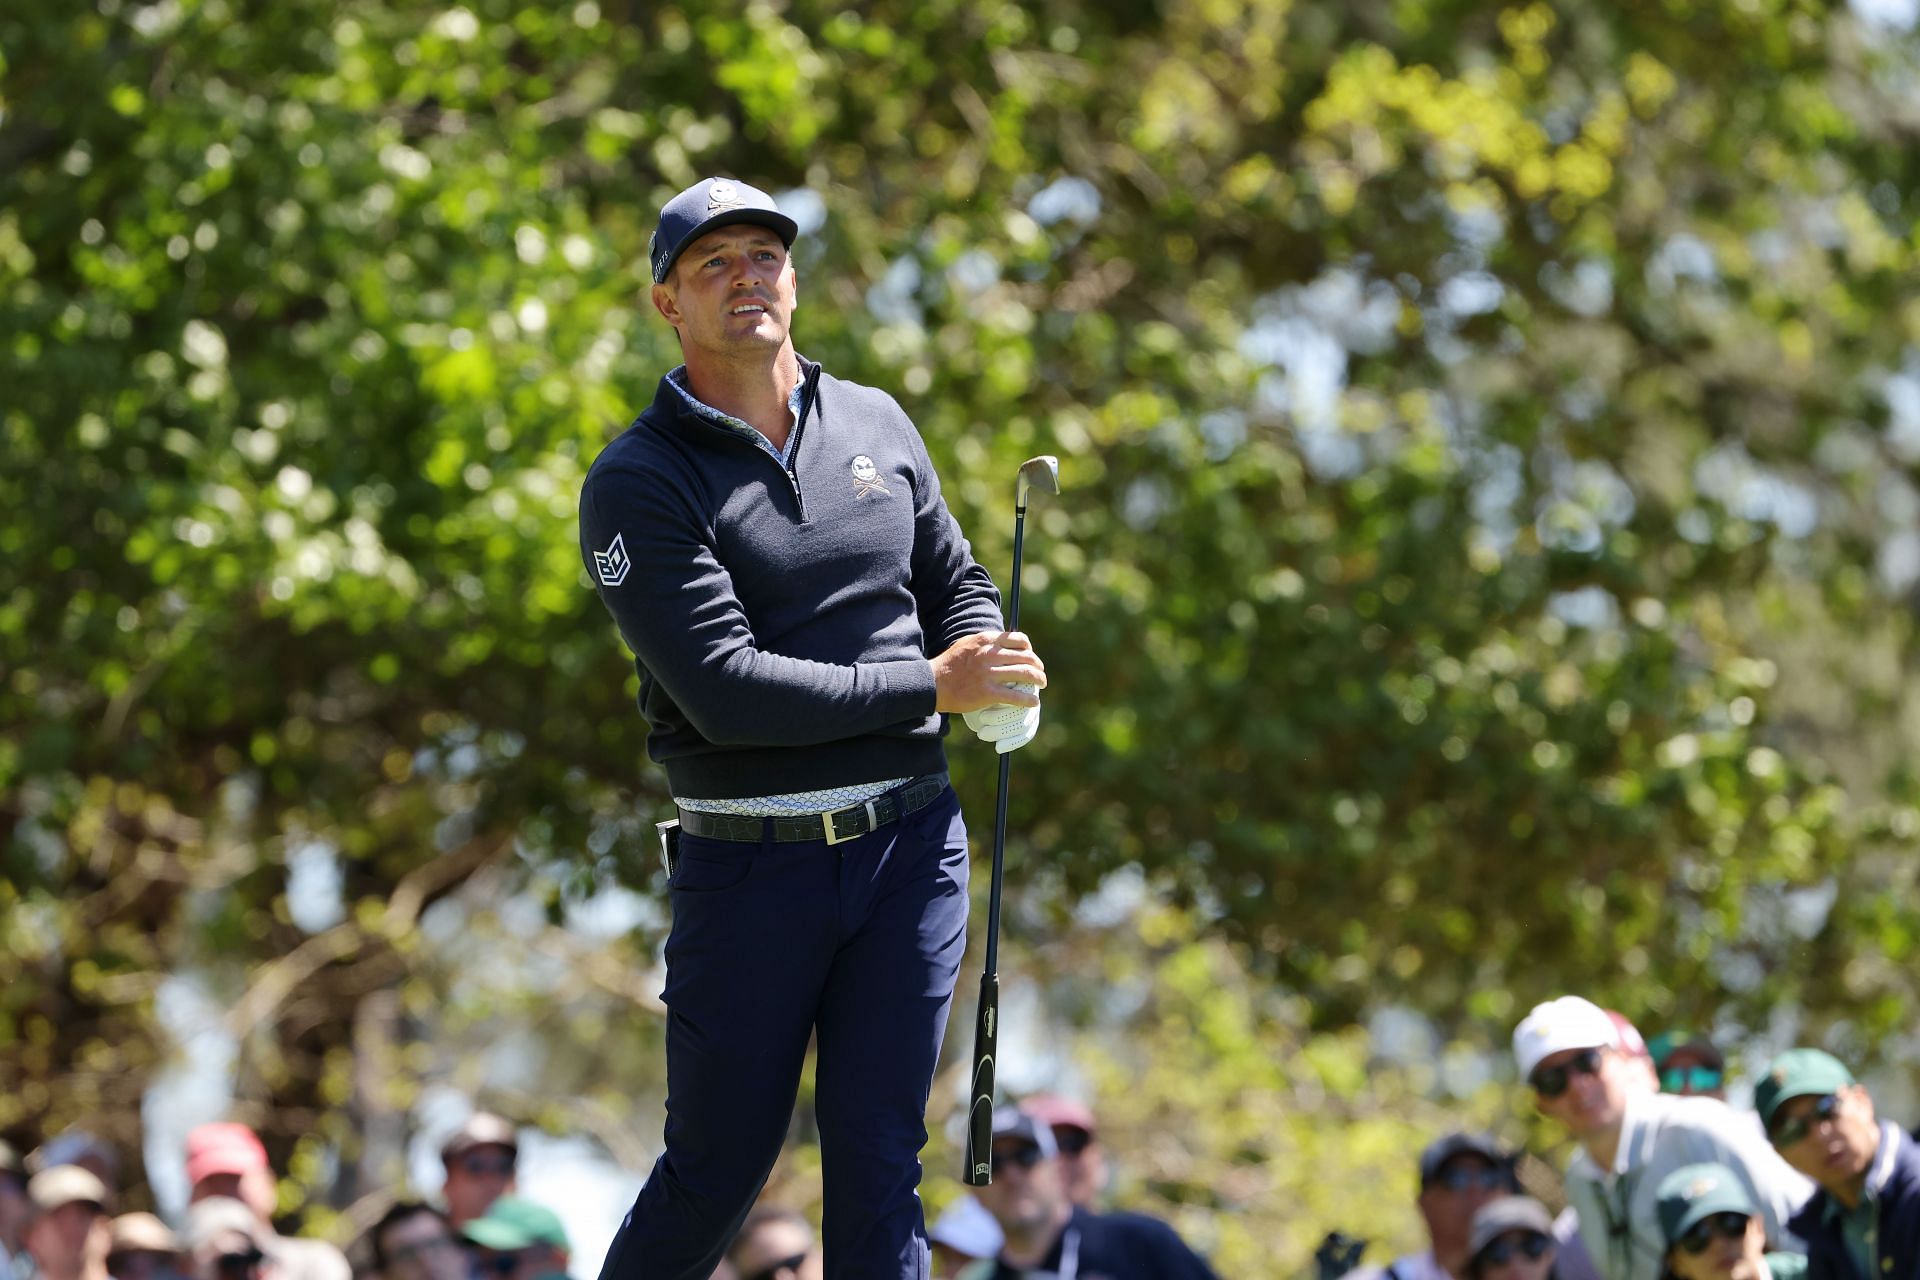 Bryson DeChambeau is playing well at the Masters